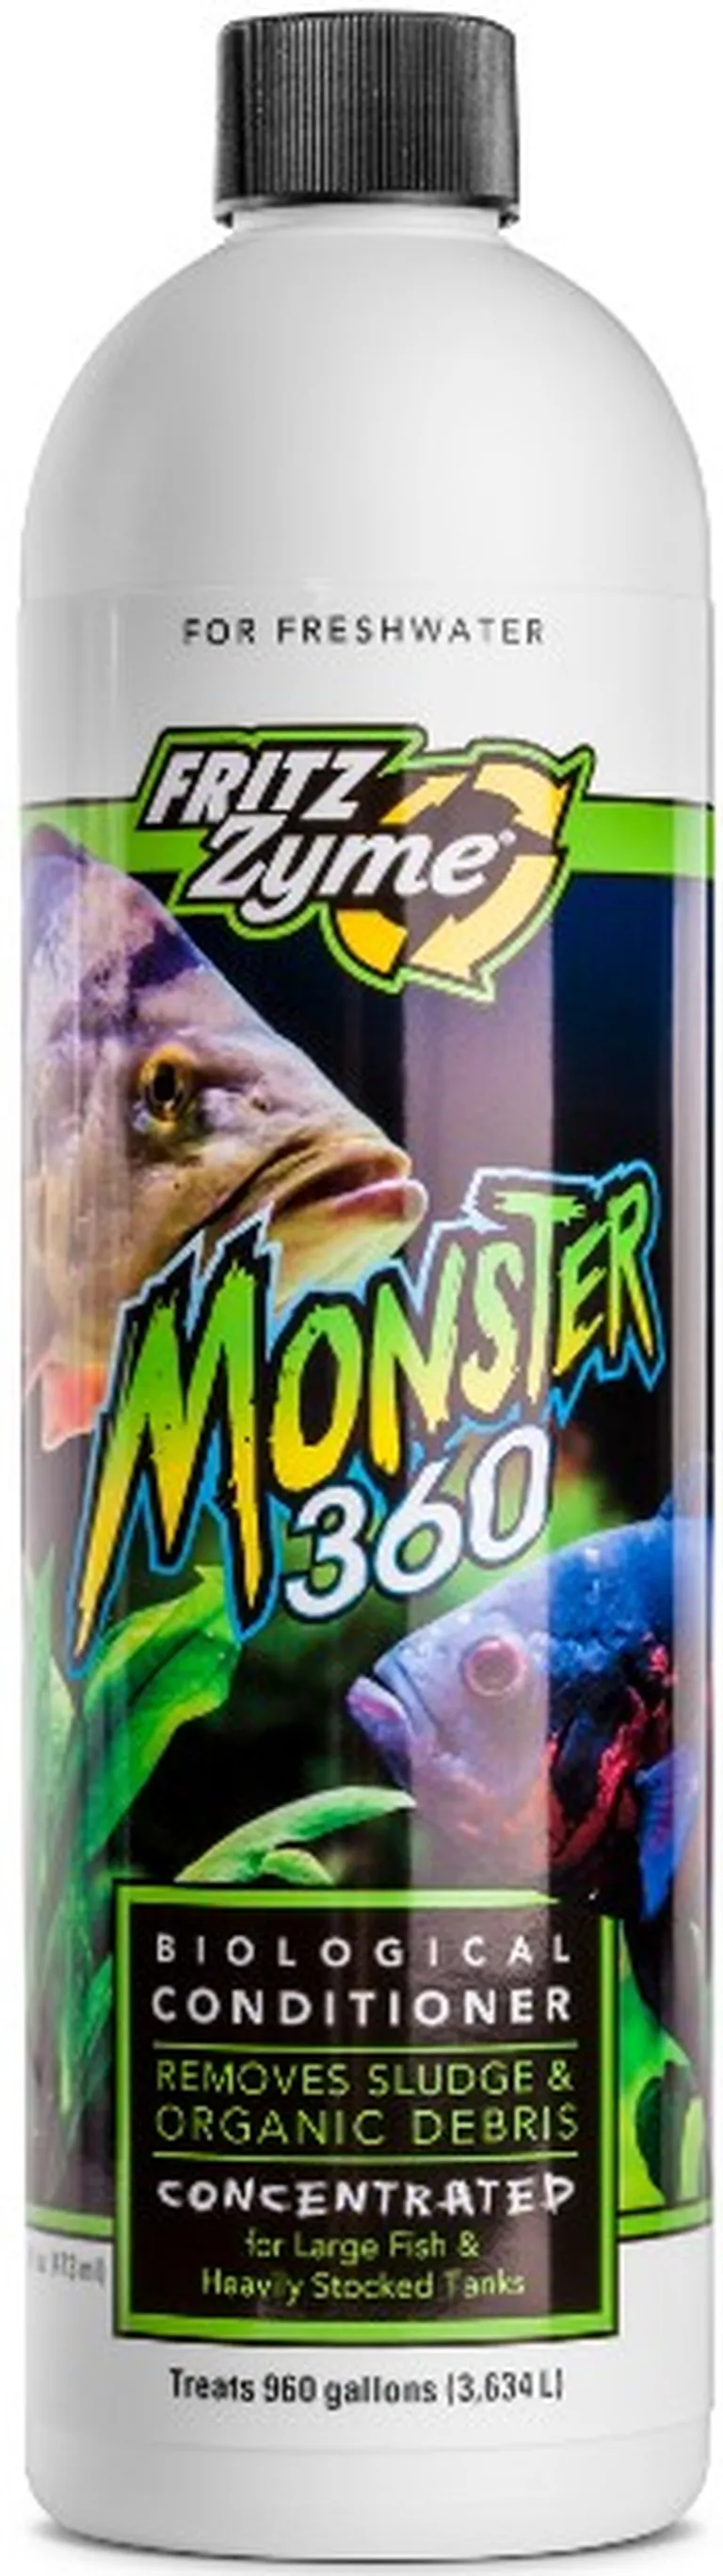 Fritz Aquatics Monster 360 Concentrated Biological Conditioner for Freshwater Photo 1